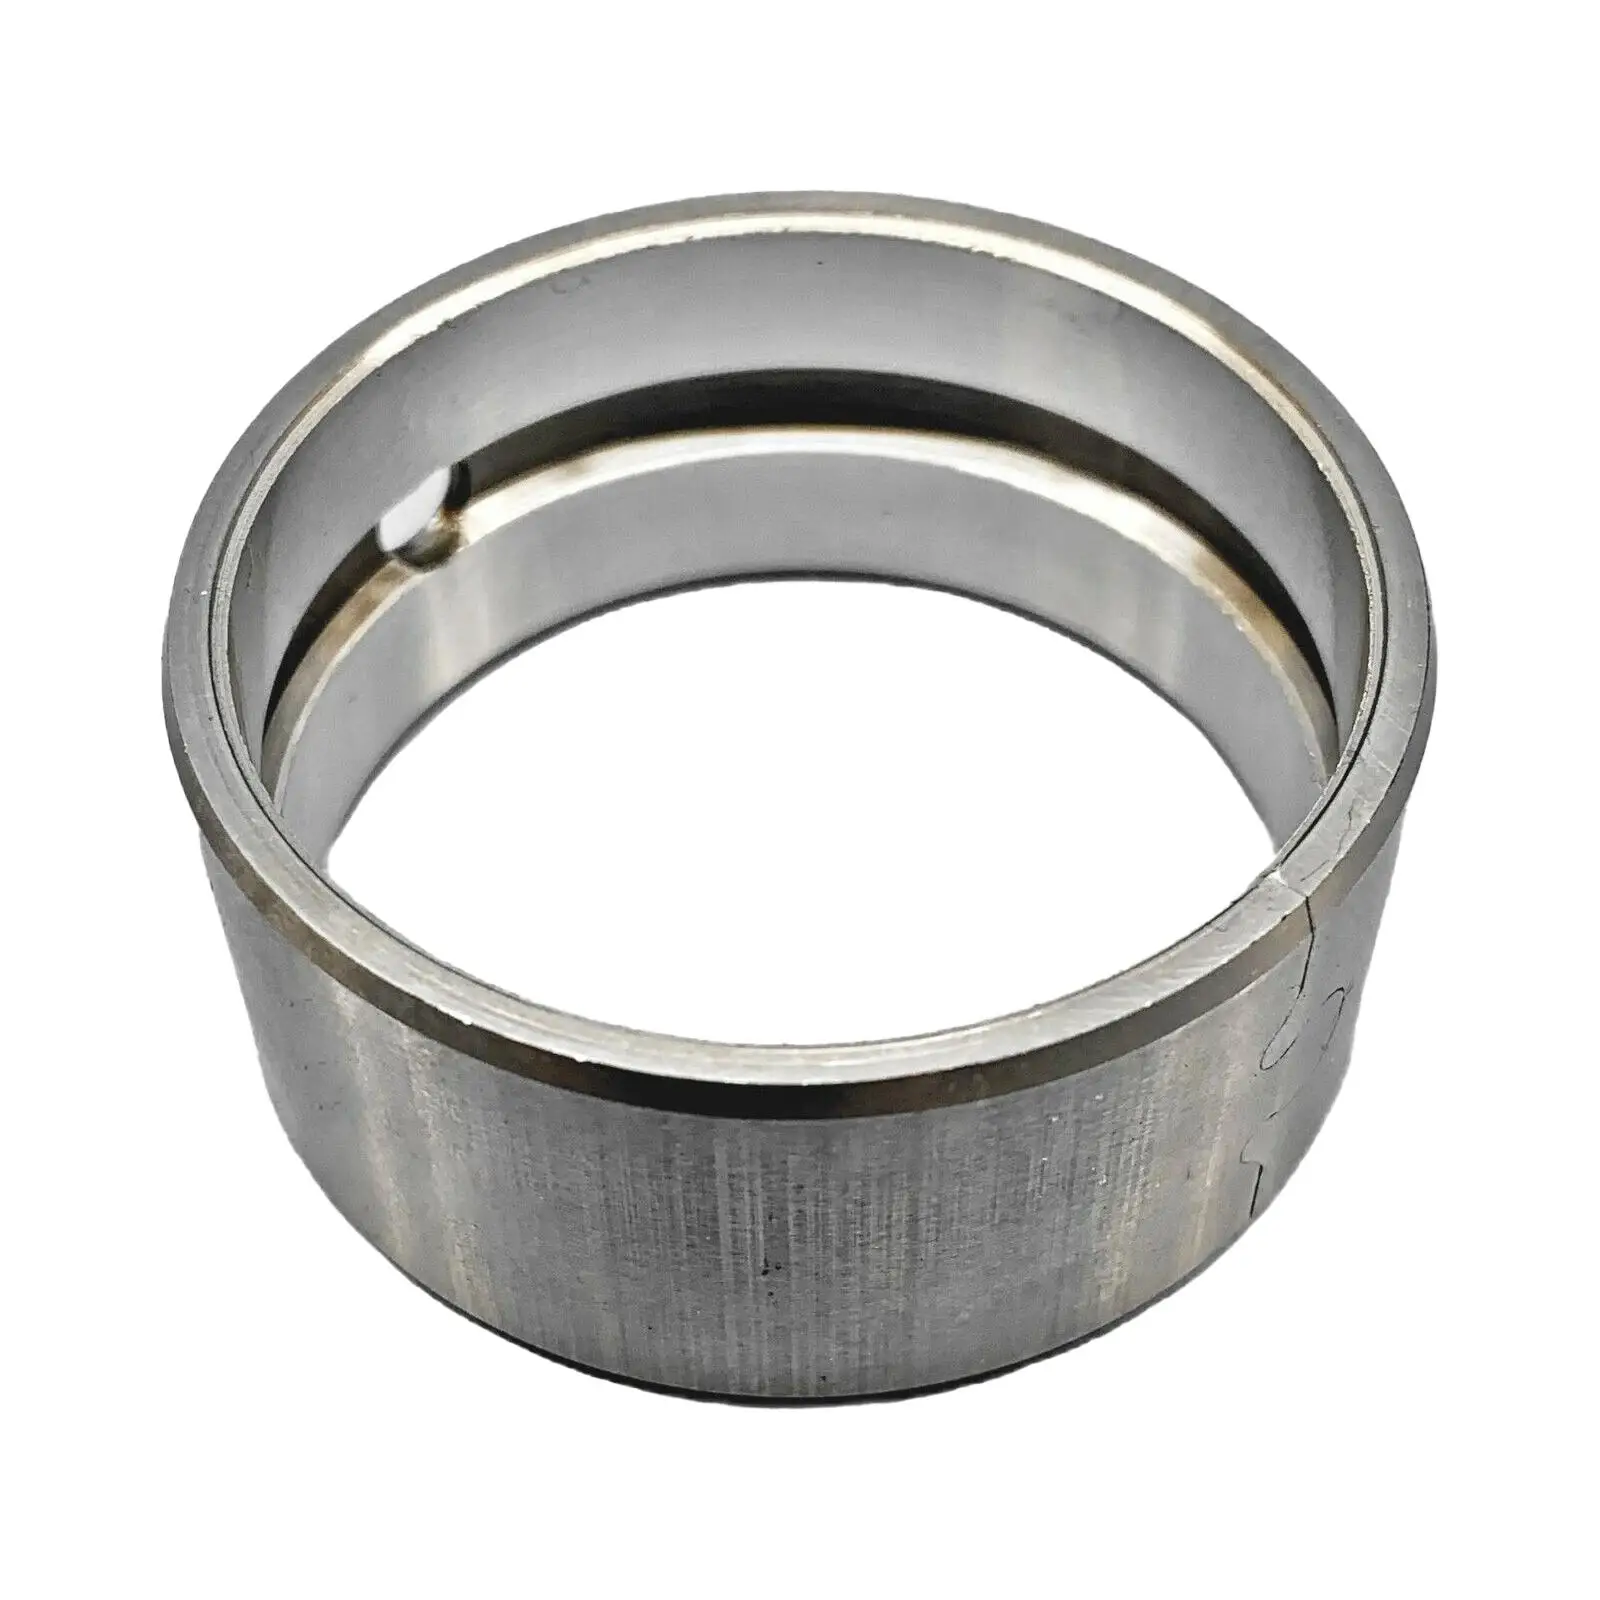 Crank Main Bearing Bushing Replaces for Polaris 450 Engines Accessory